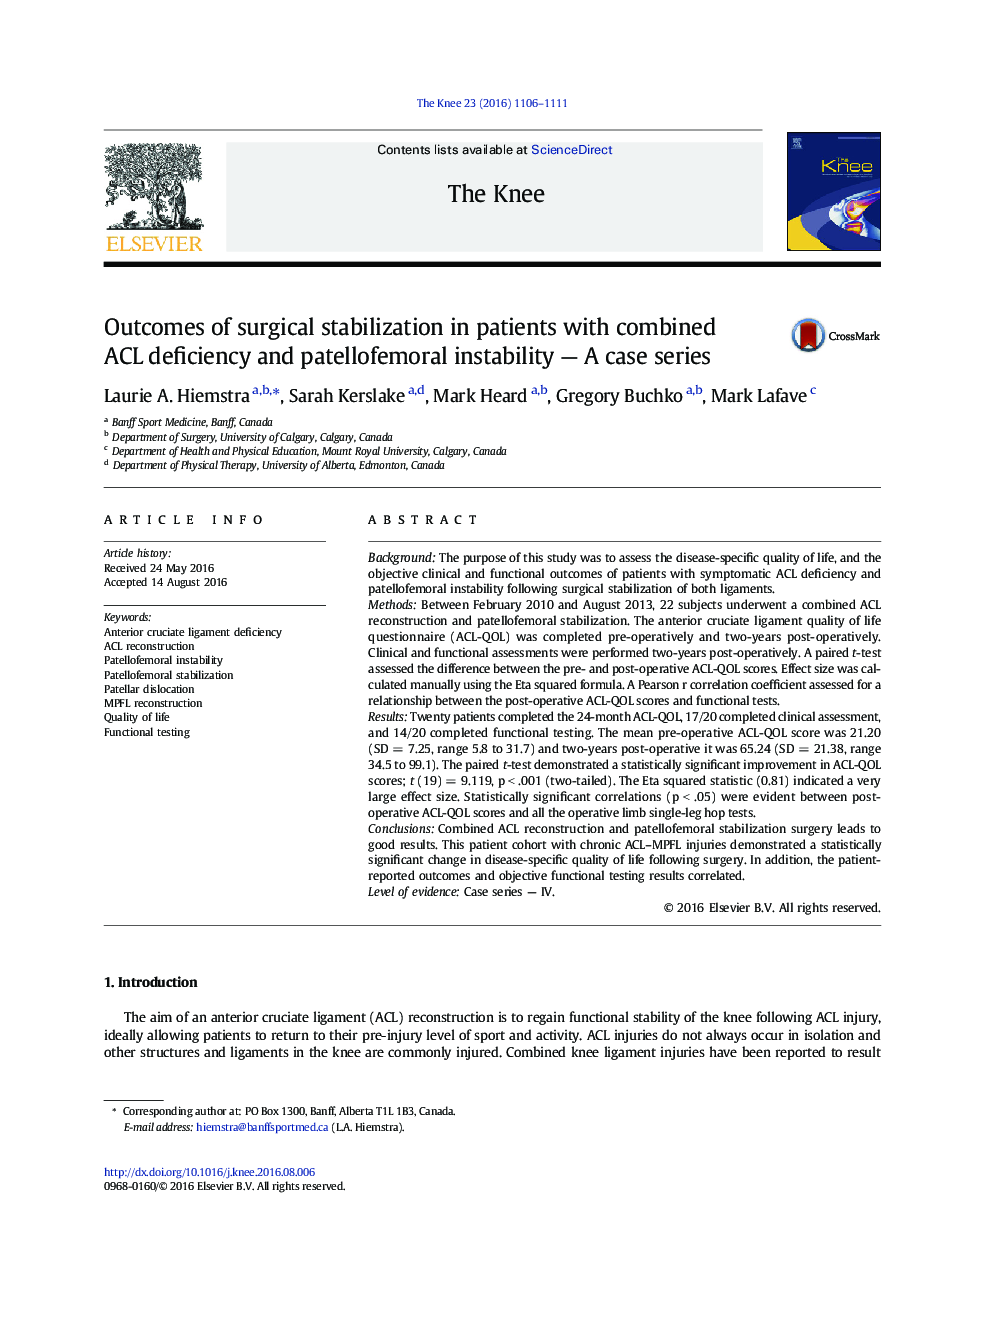 Outcomes of surgical stabilization in patients with combined ACL deficiency and patellofemoral instability - A case series